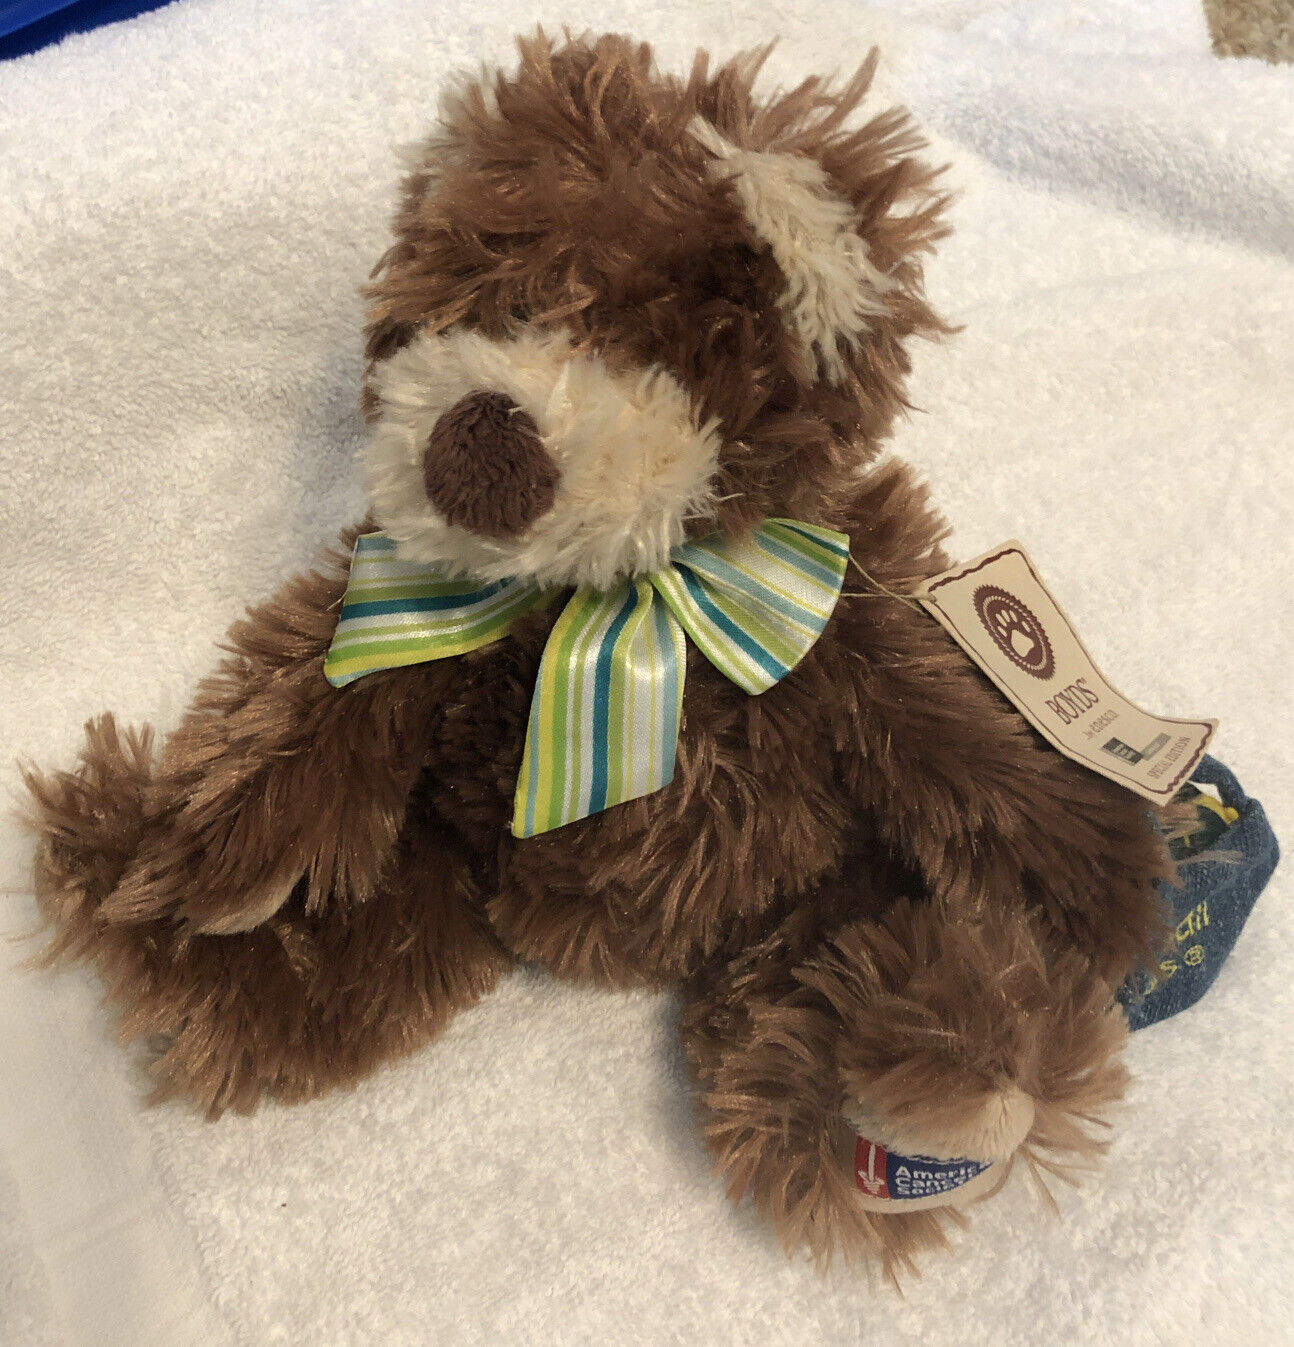 Retired Boyds Bears 8” Special Edition American Cancer Society - Spring 2009 NWT